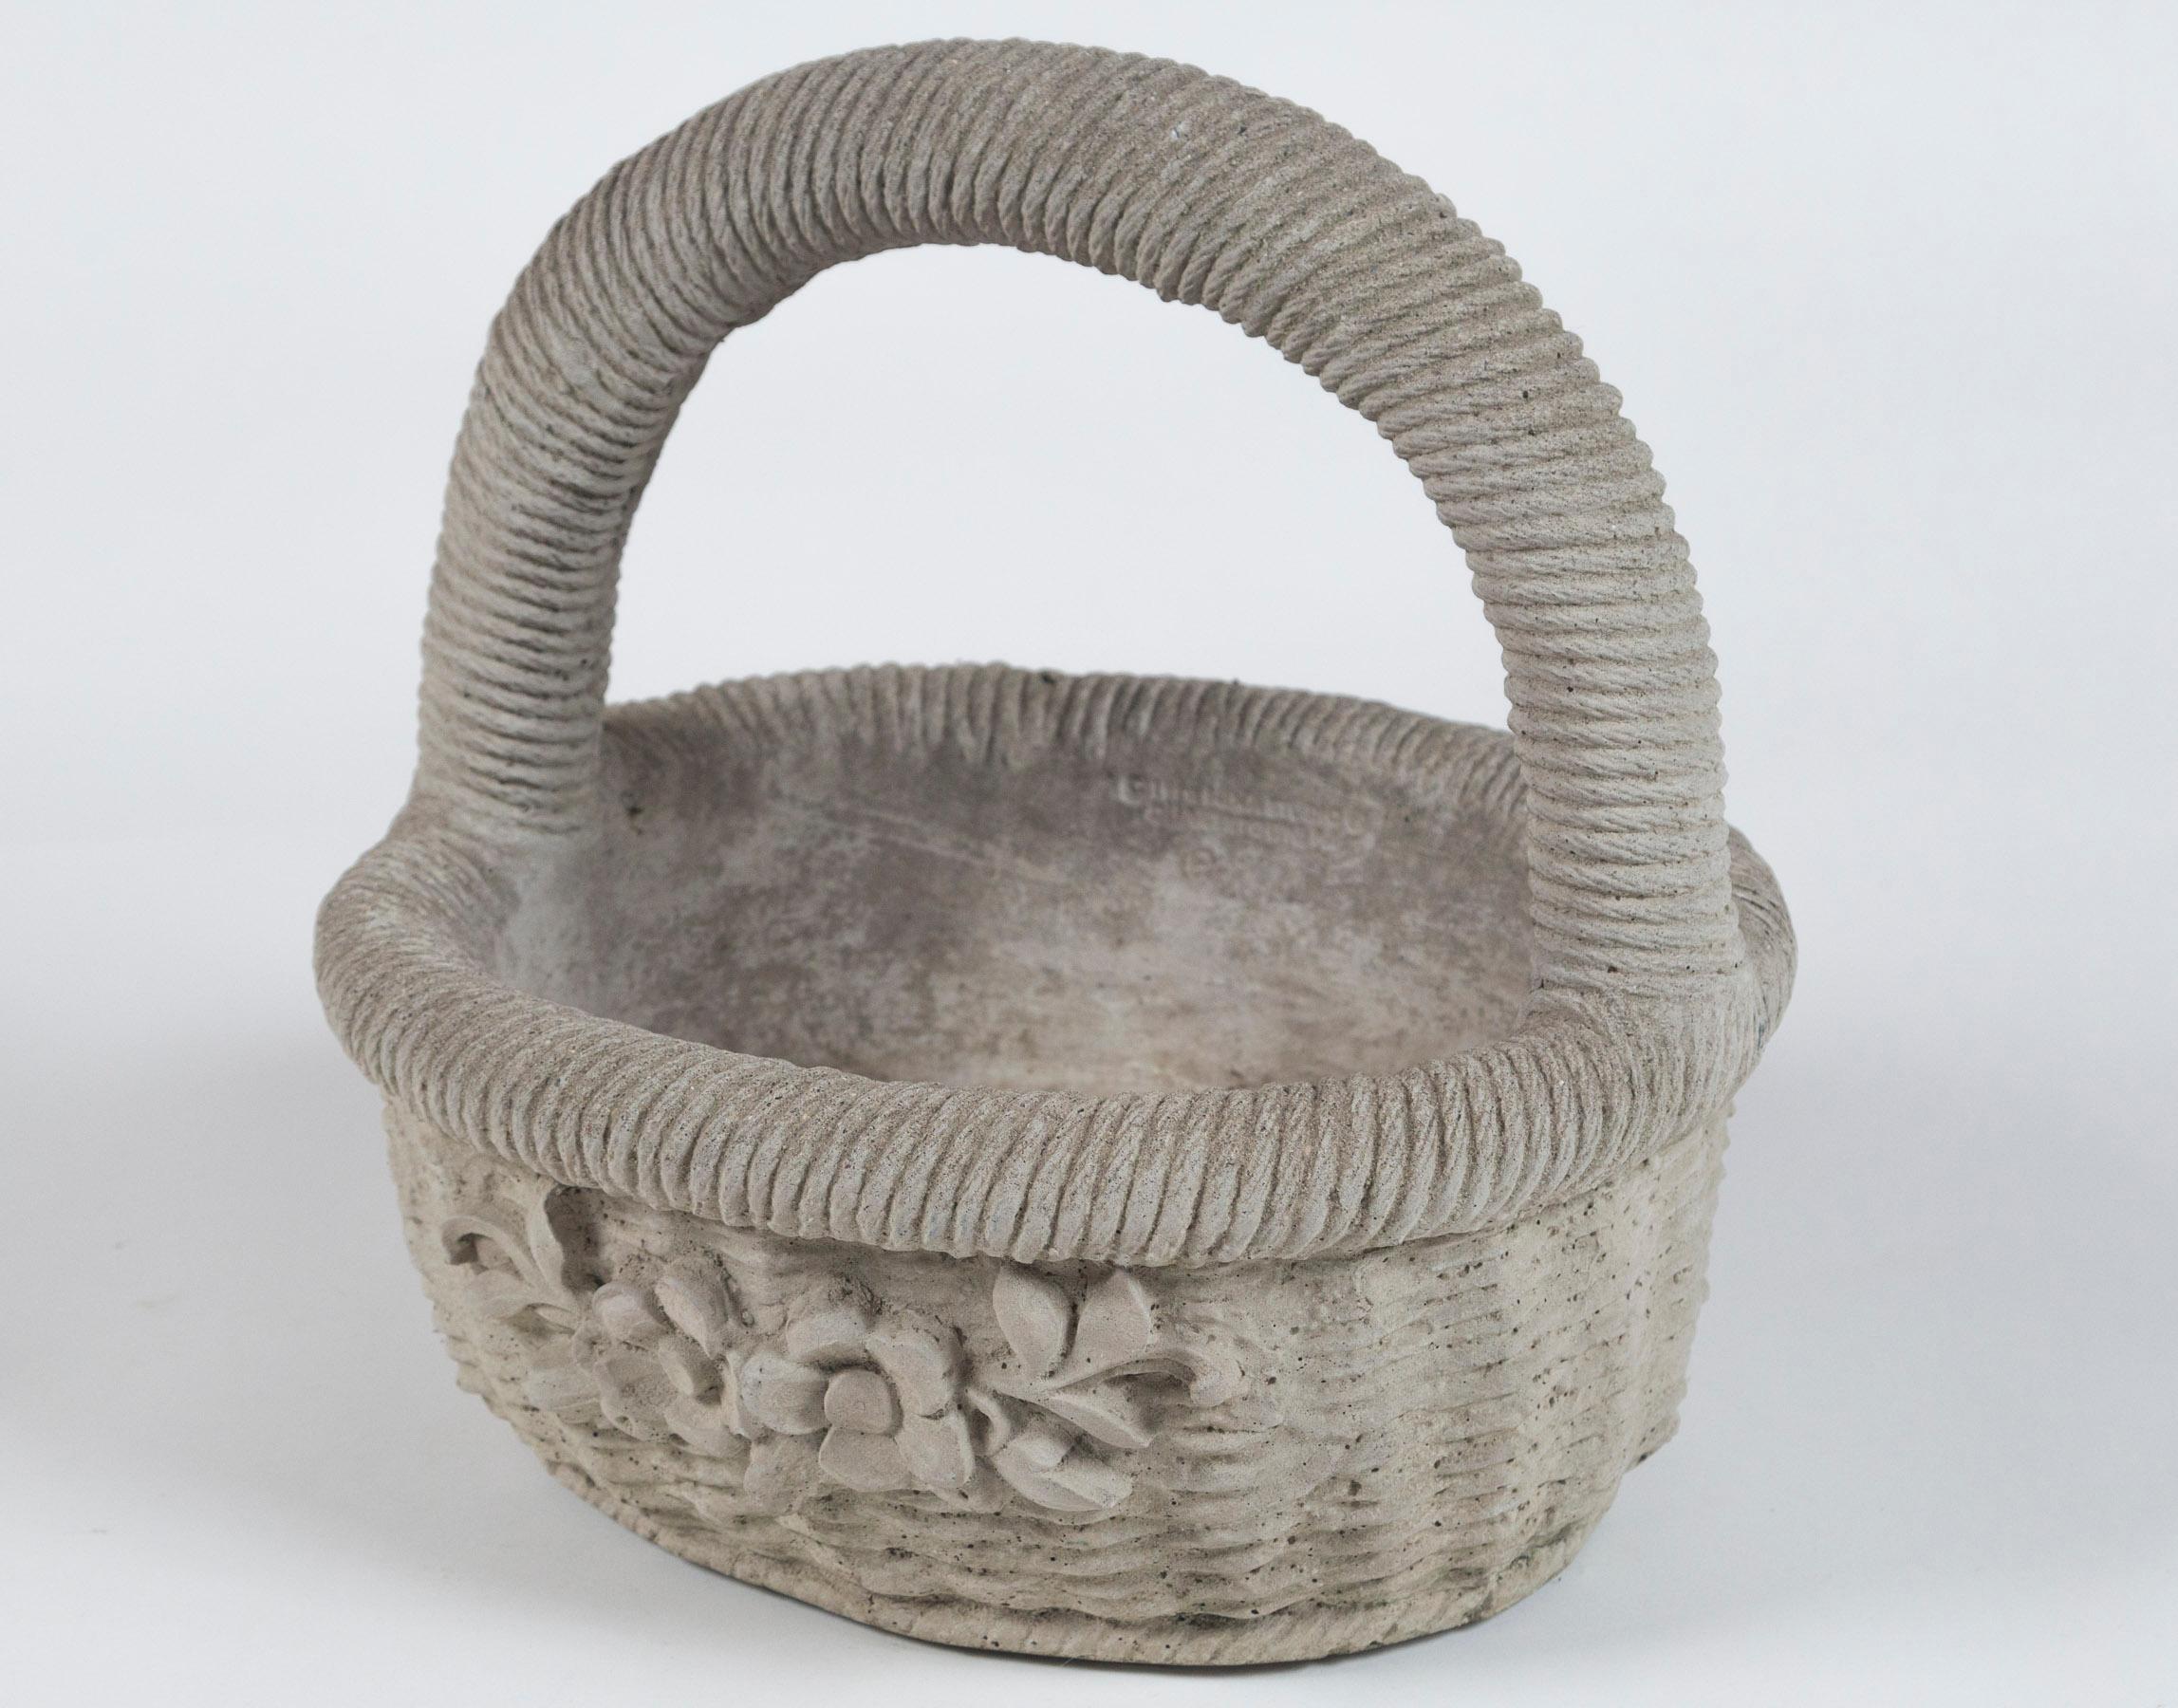 Cast cement garden basket, 20th century. Nicely detailed with overall woven rattan design and floral relief.